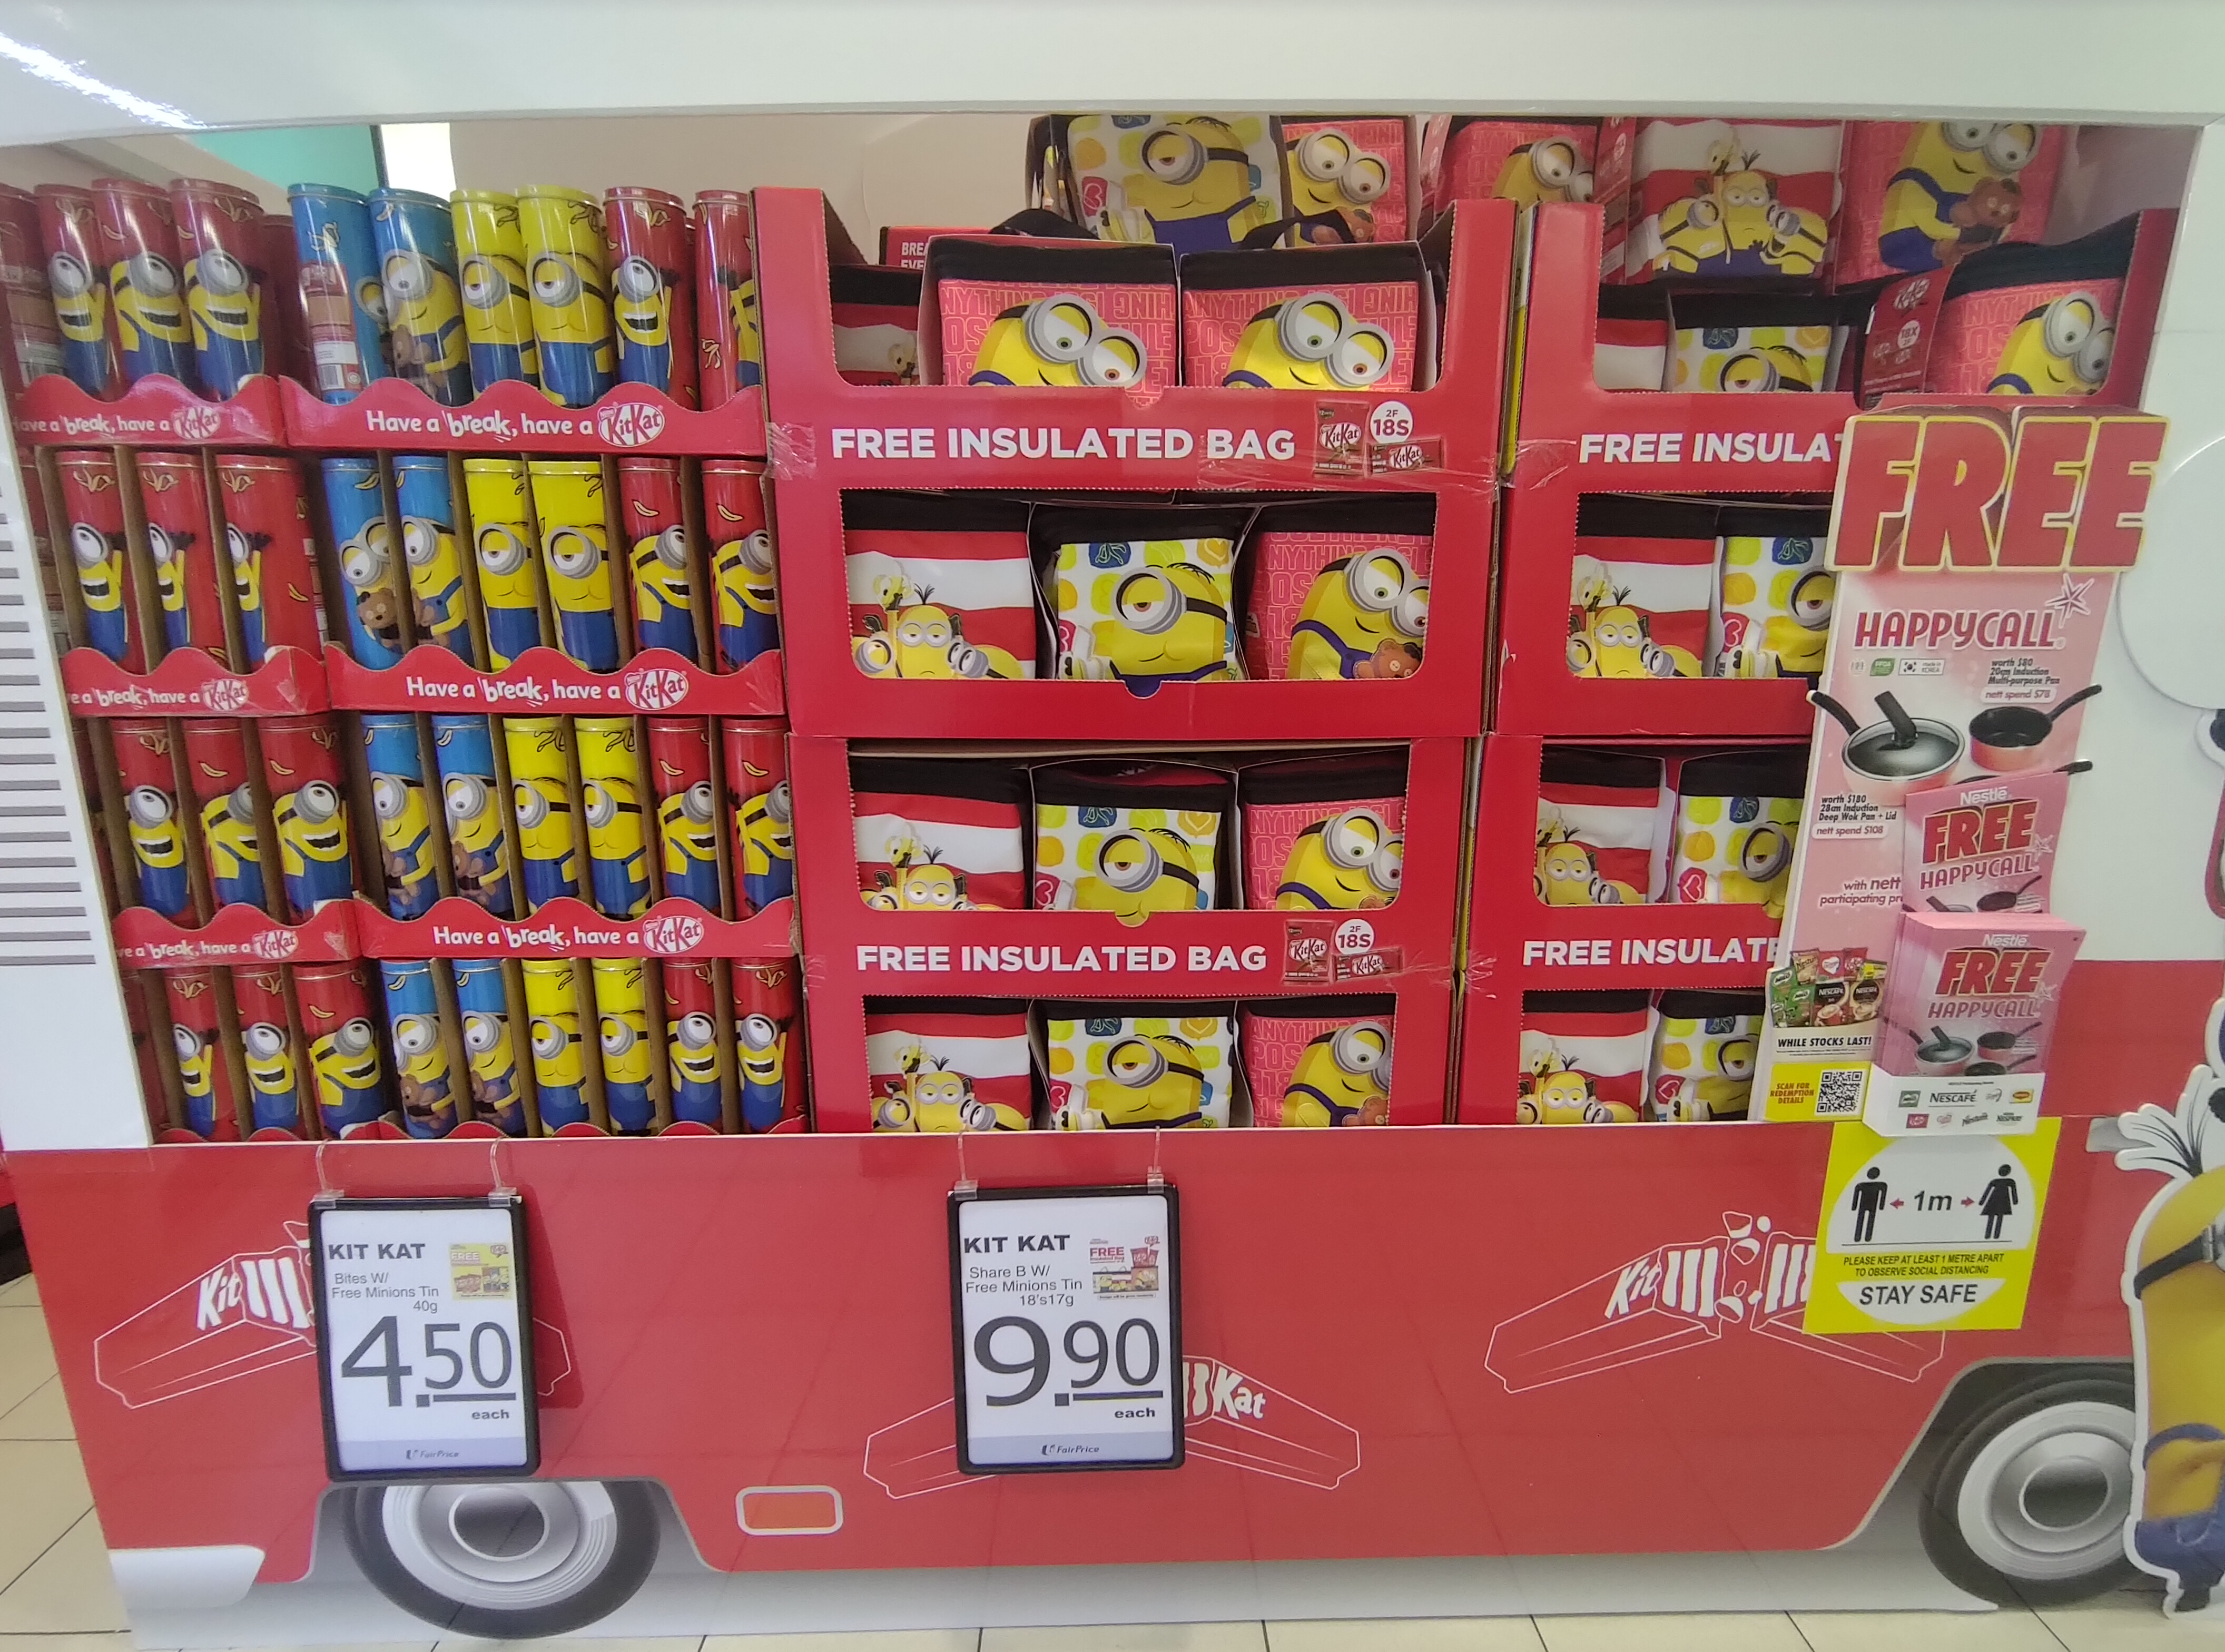 Free Limited Edition Minion Cooler Bag when you purchase Kit Kat at FairPrice - 1